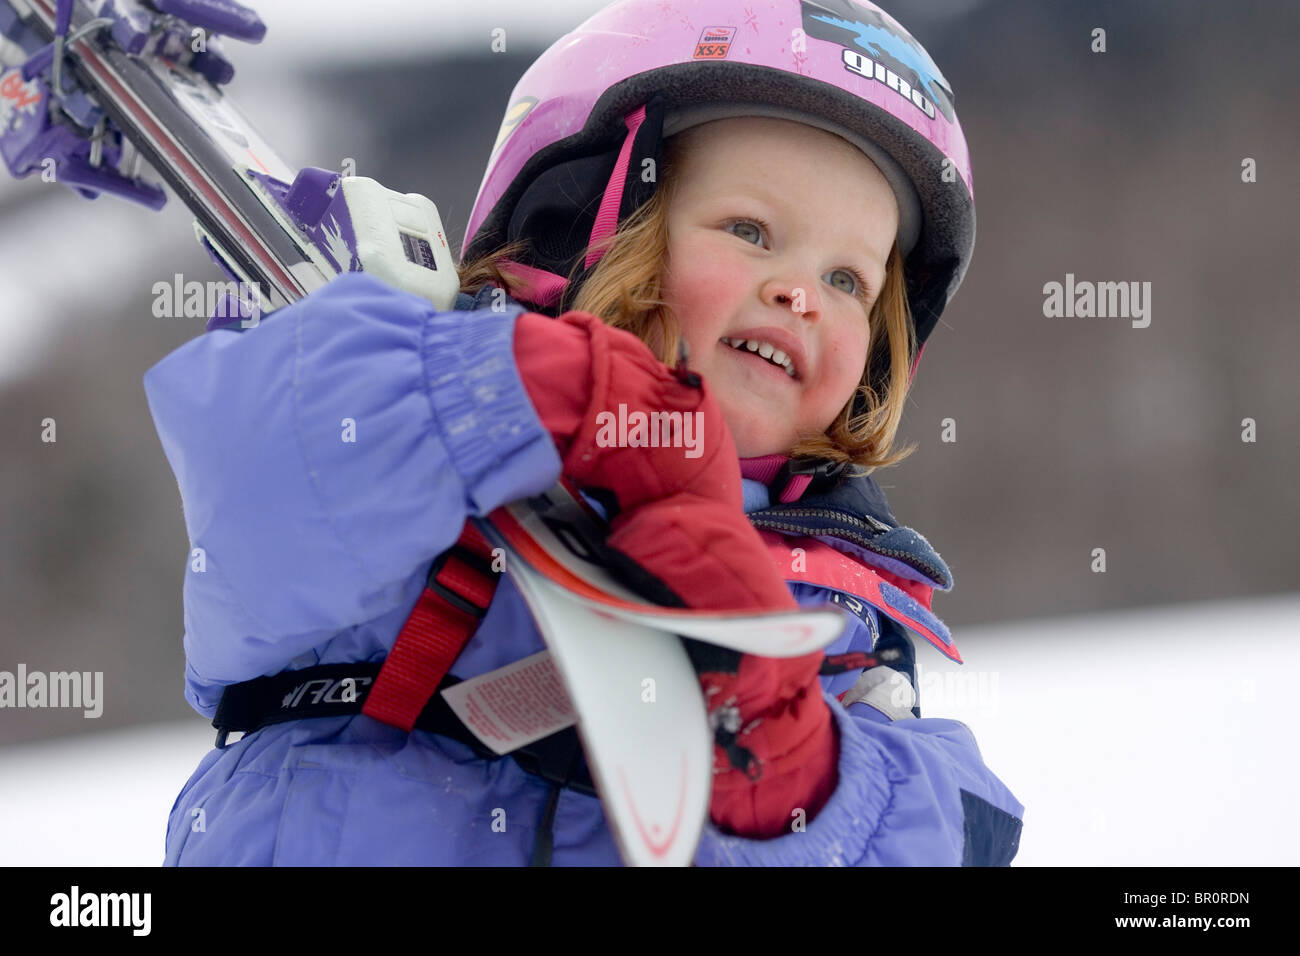 A young girl carries her skis while learinging to ski at Sunday River in Bethel, Maine. Stock Photo